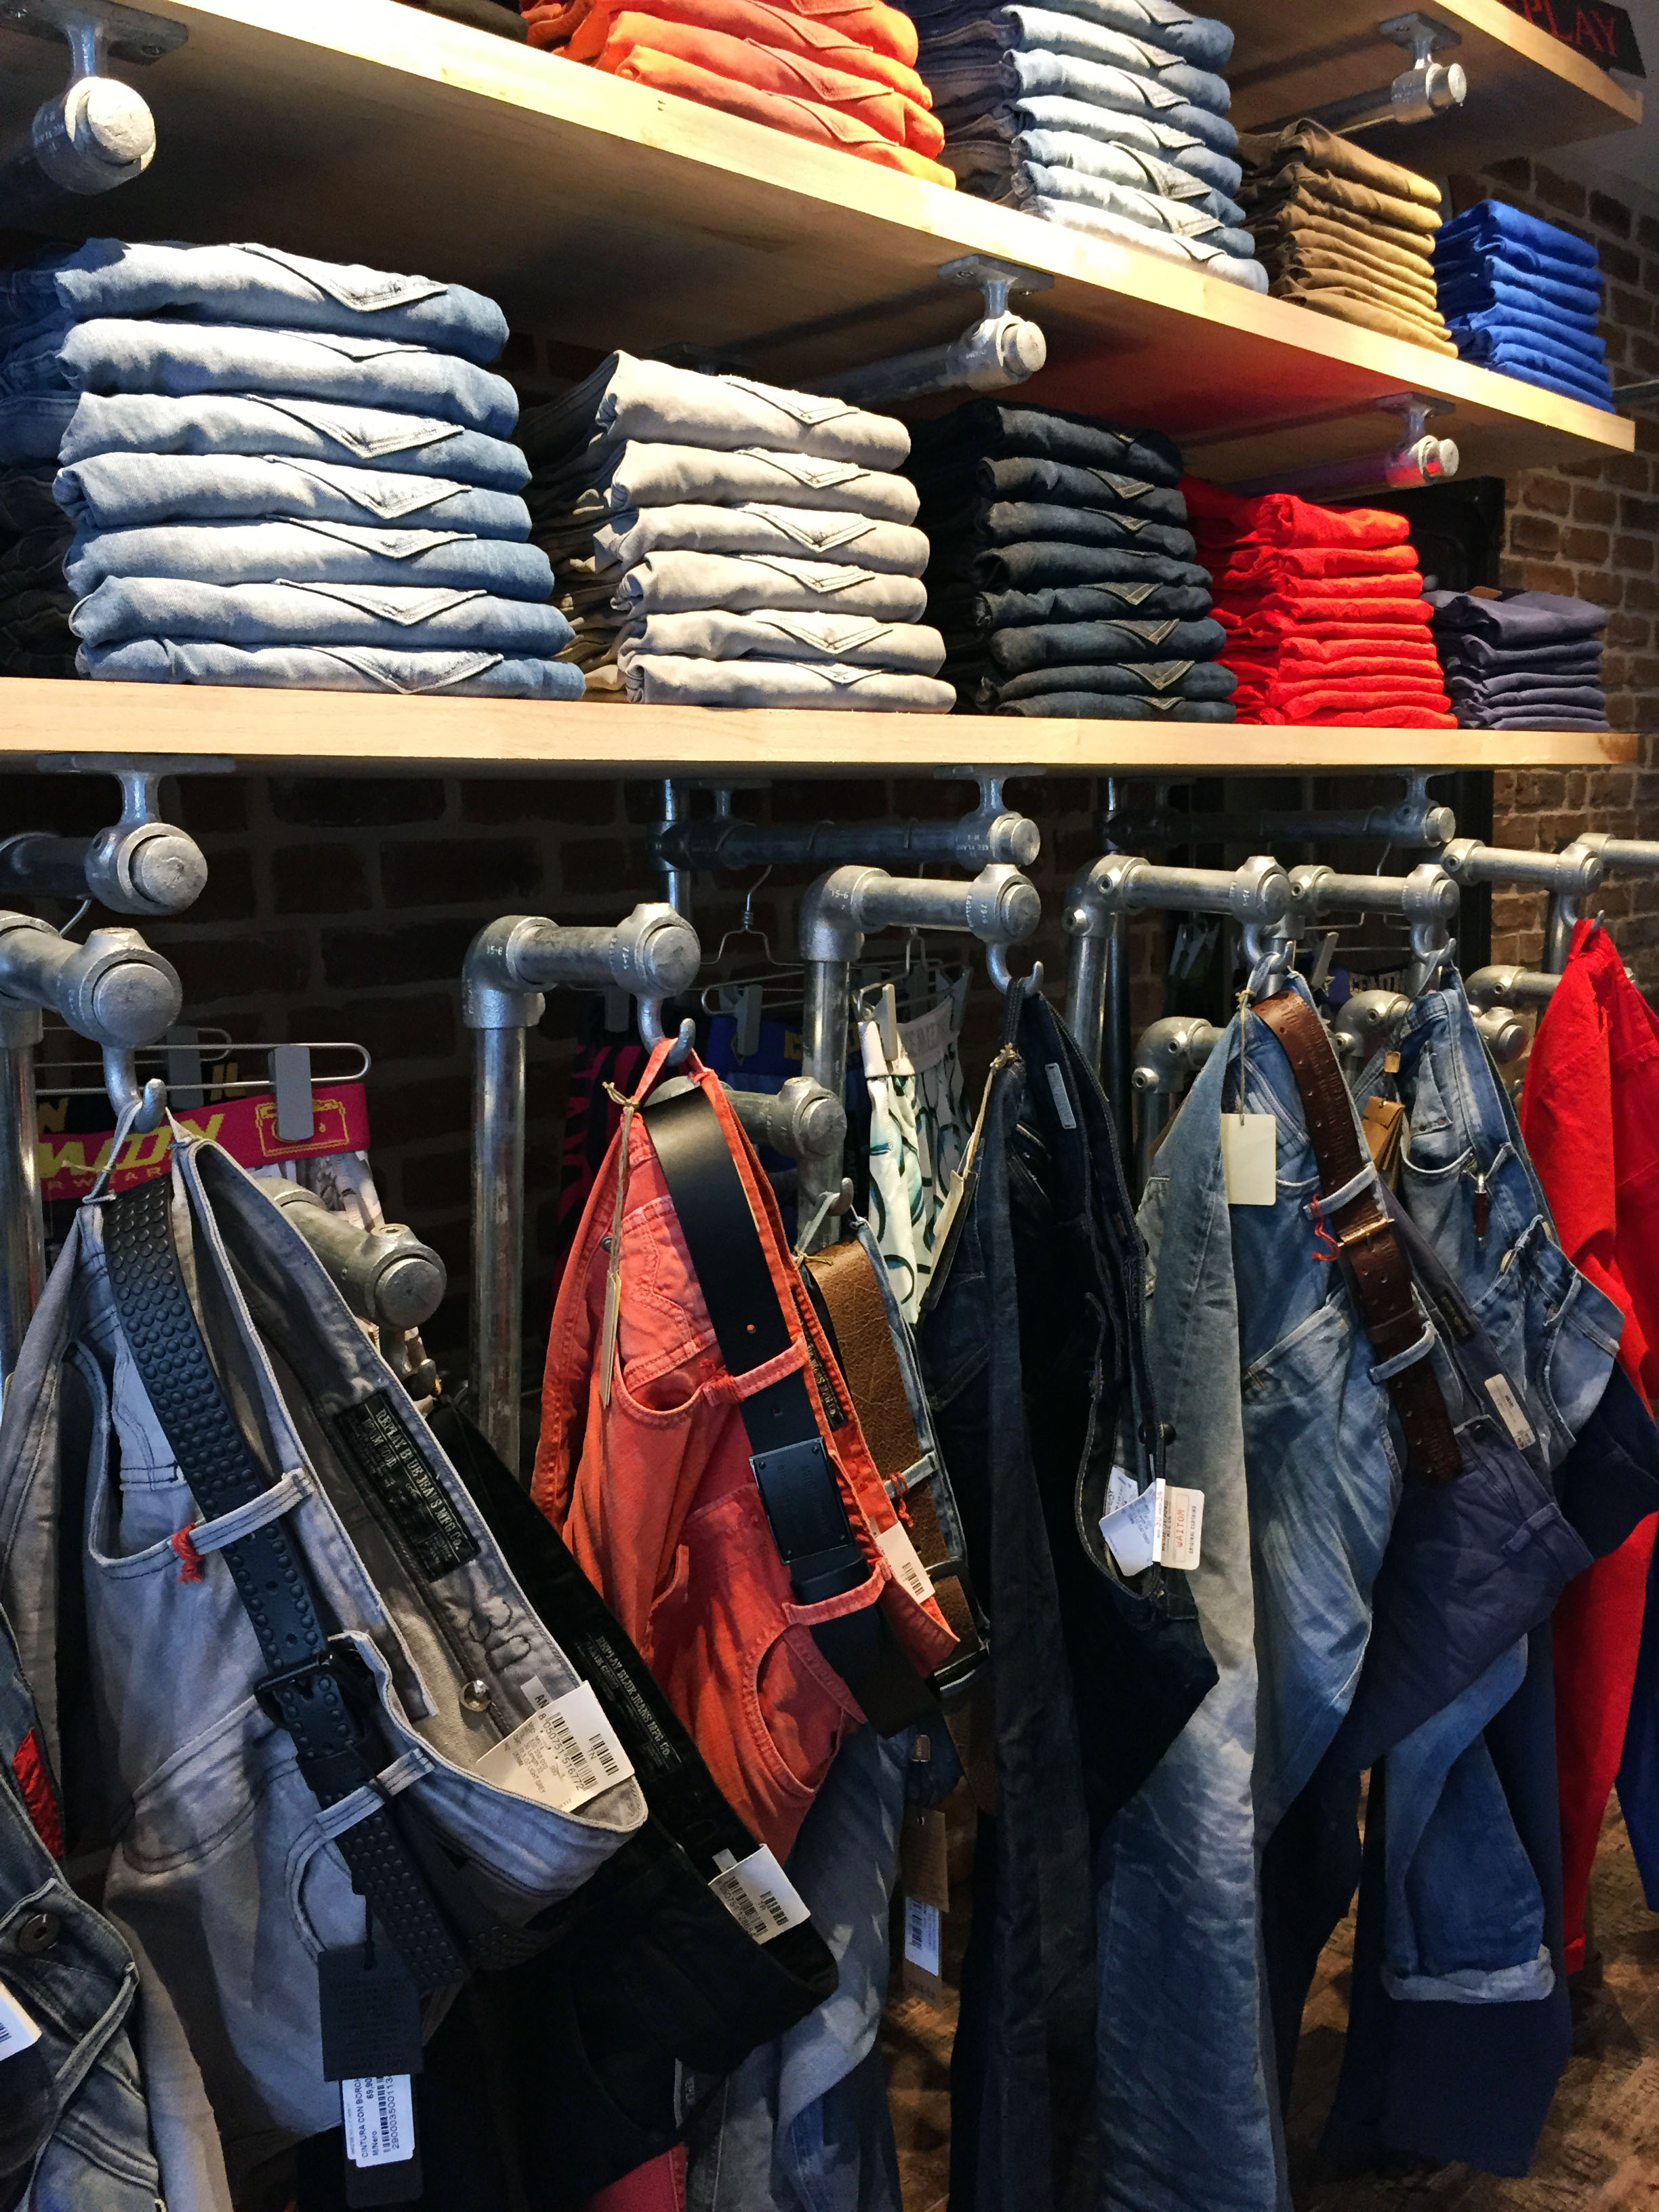 39 Diy Retail Display Ideas (From Clothing Racks To Signage) | Simplified  Building